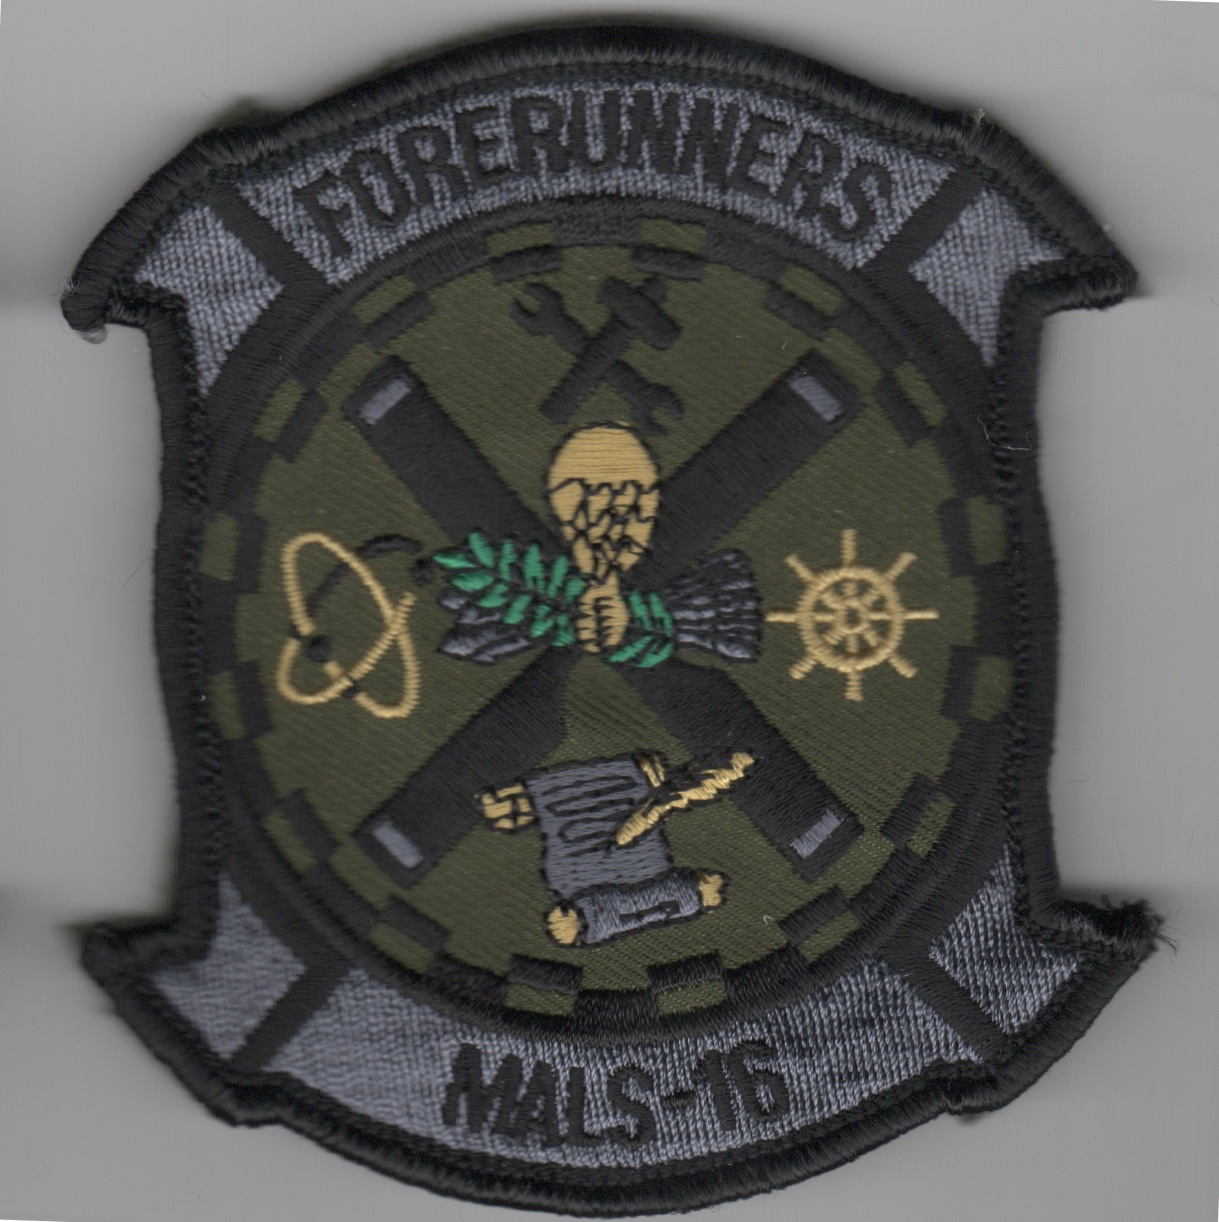 MALS-16 'Forerunners' Sqdn Patch (Subd)